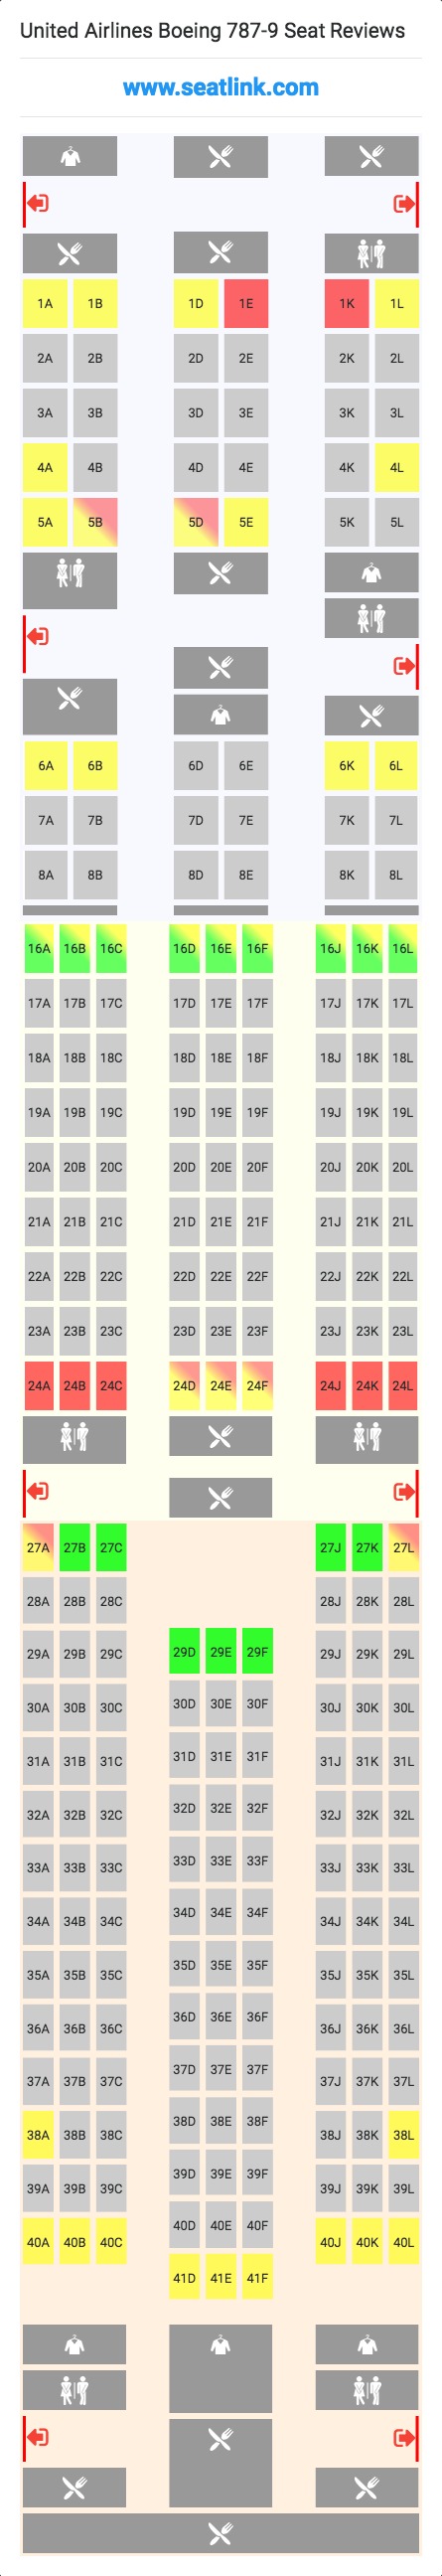 United Airlines Boeing 787-9 (789) Seat Map